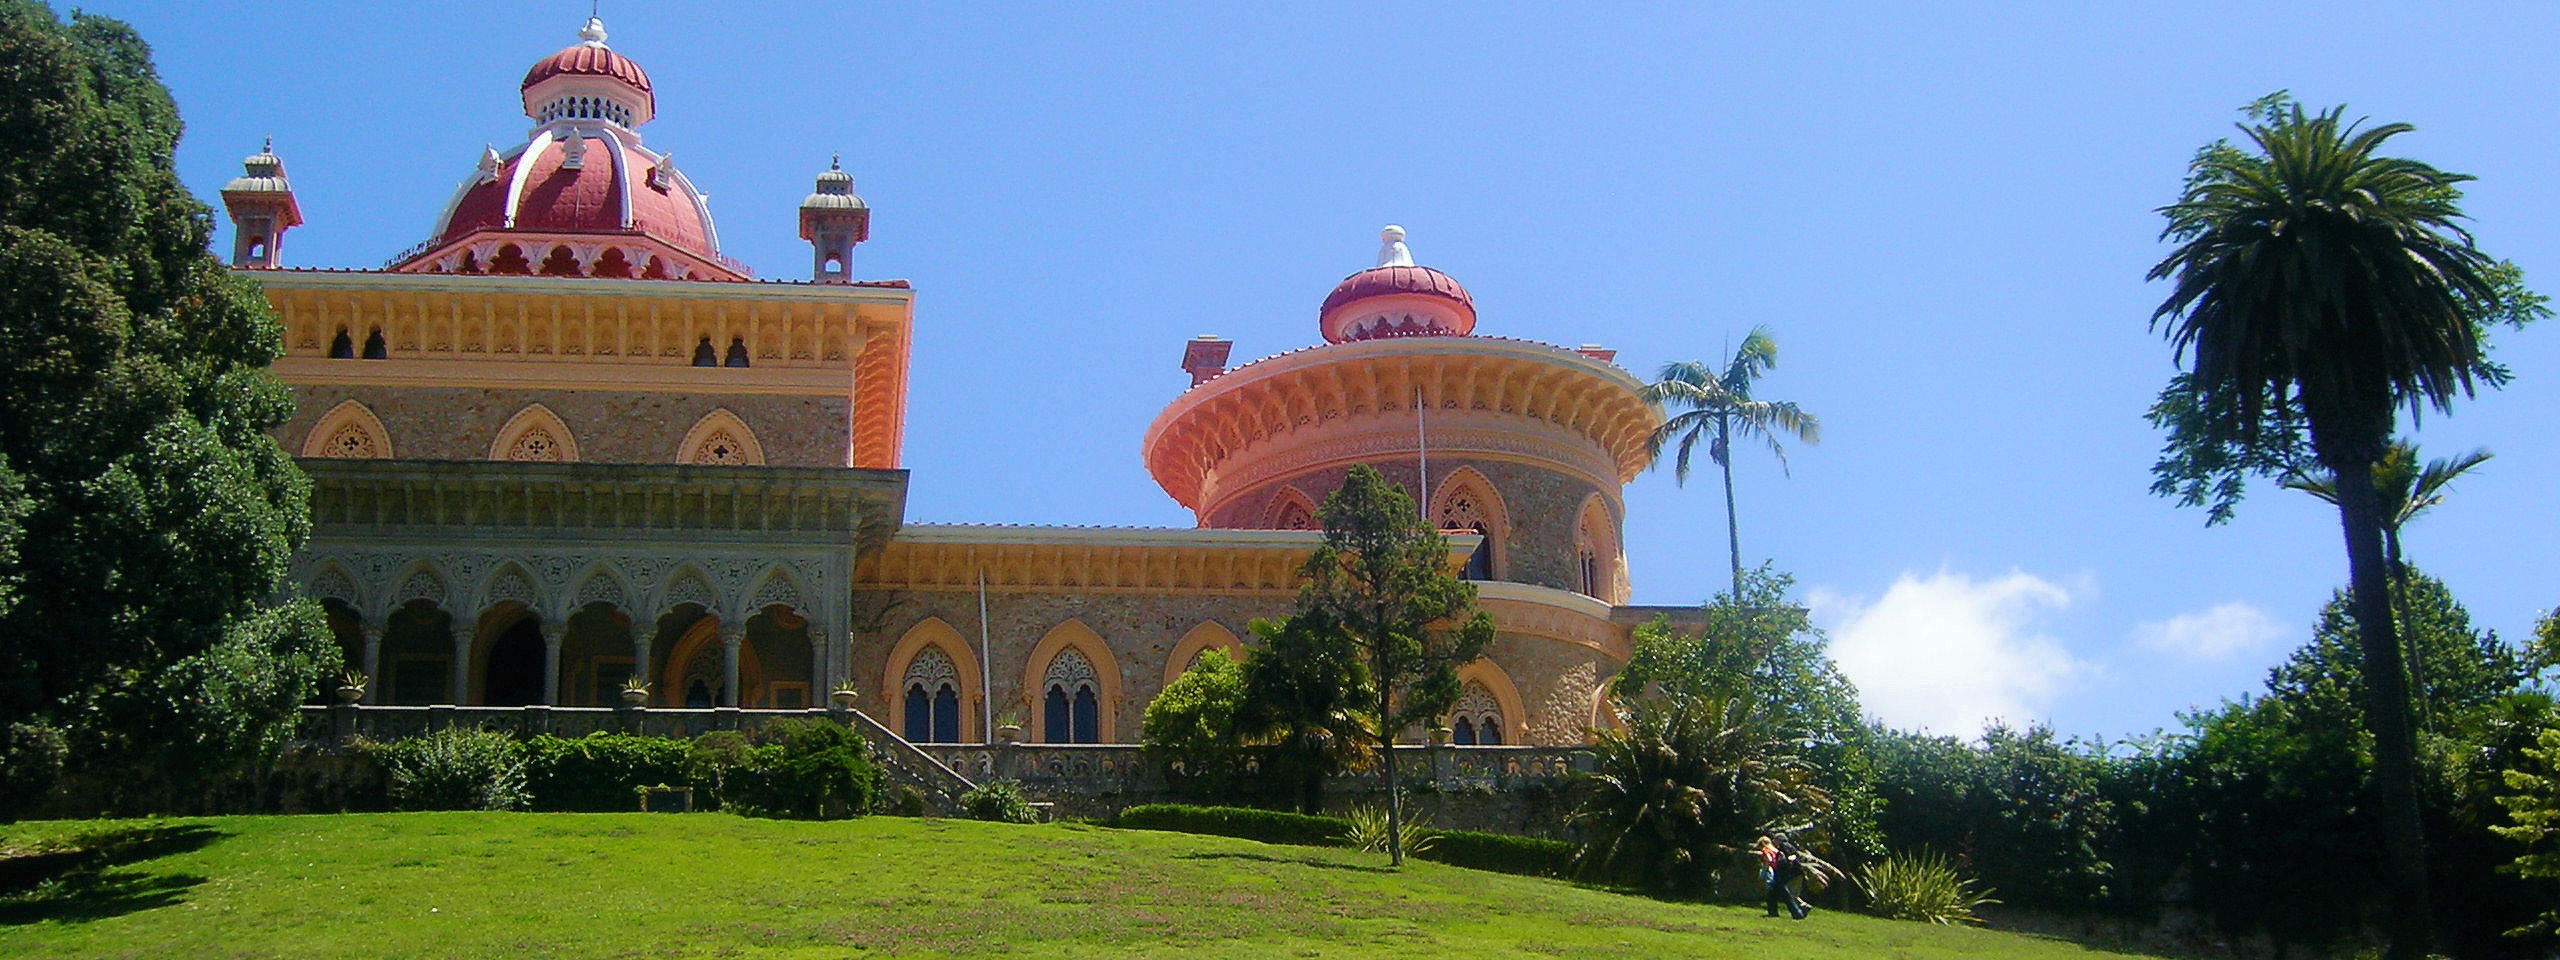 Monserrate Palace and Gardens